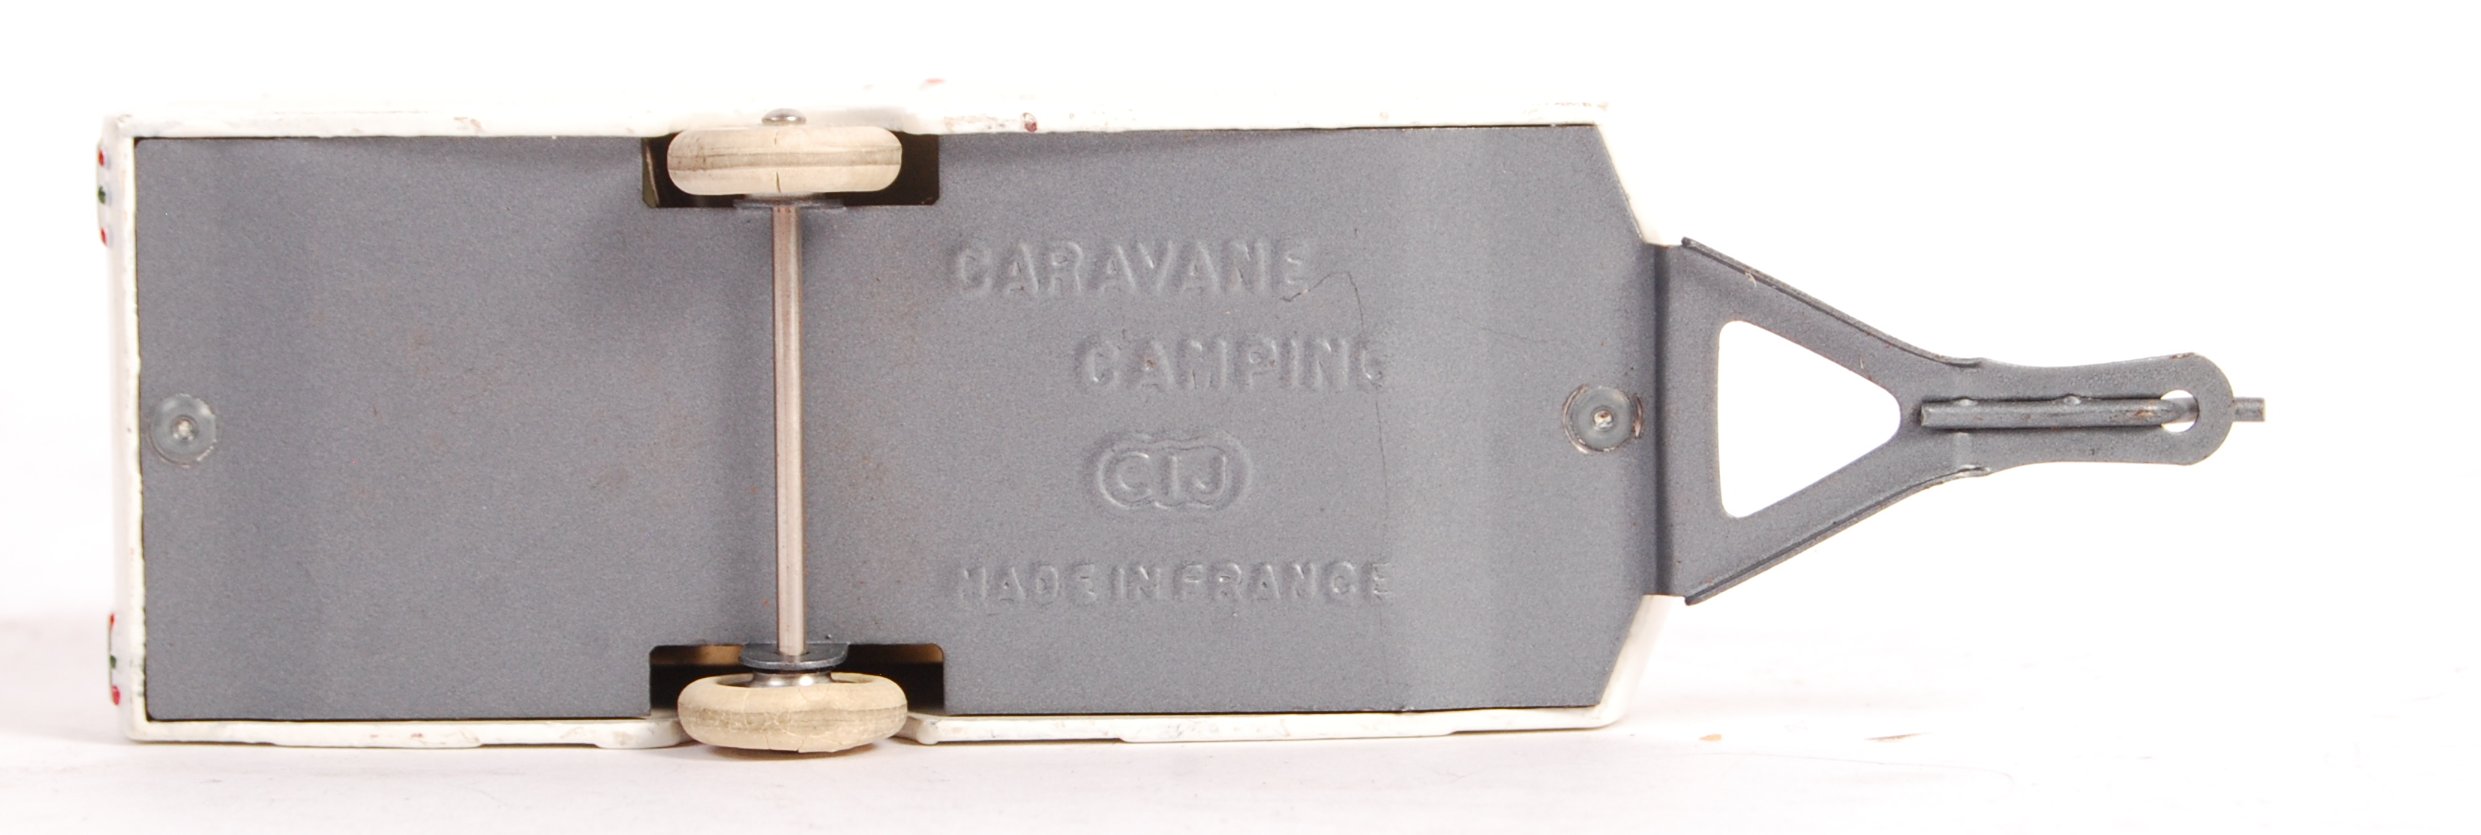 RARE FRENCH BOXED CIJ 1/43 SCALE CARAVANE CAMPING - Image 4 of 6